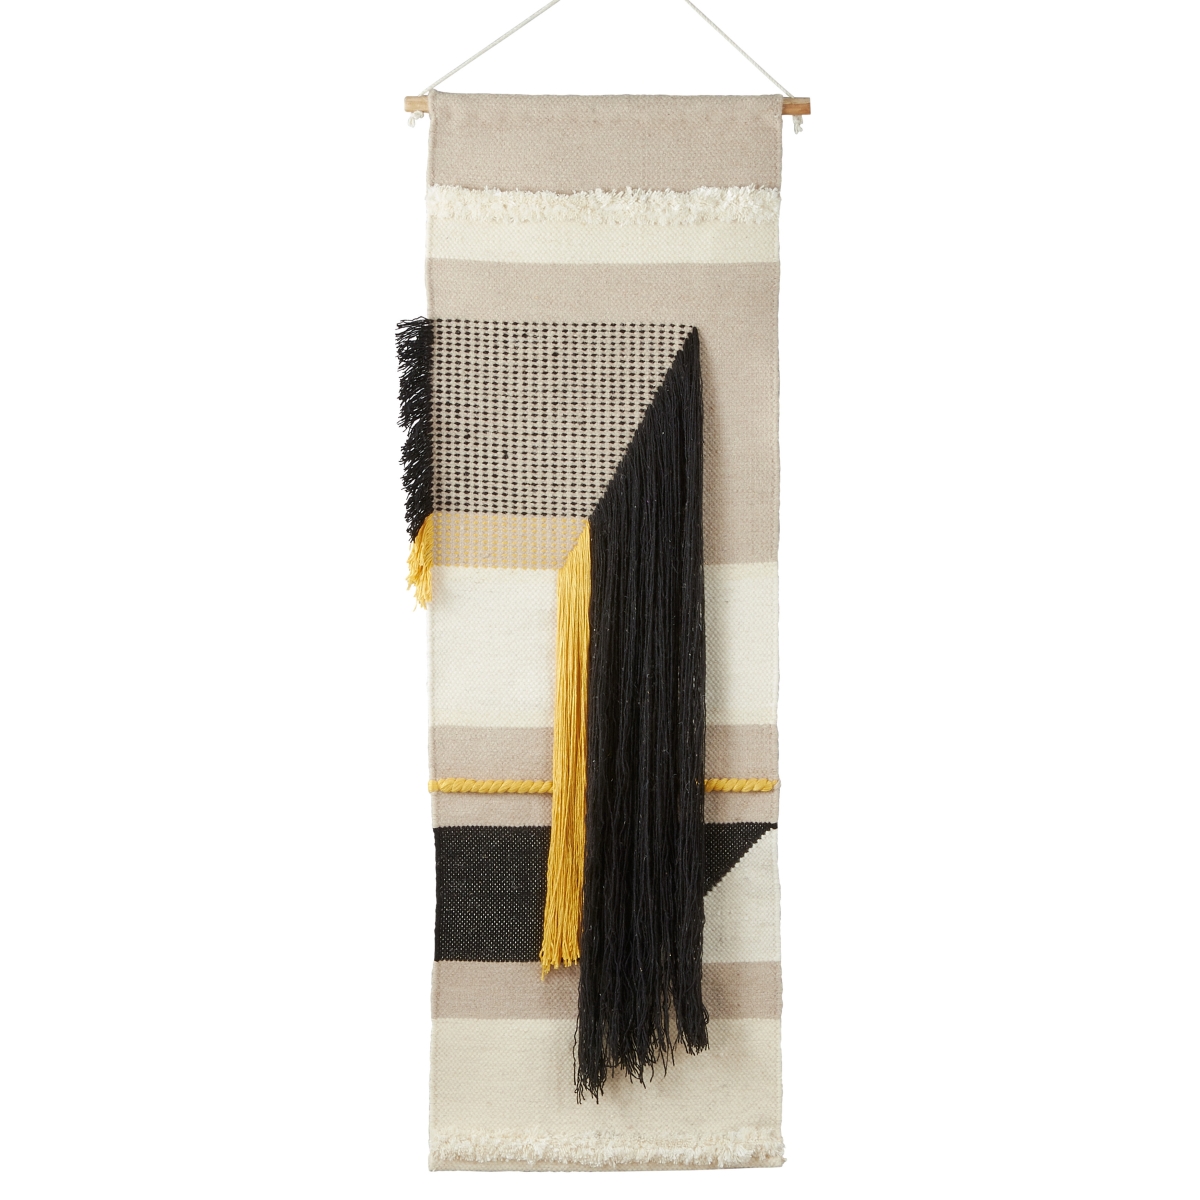 18 x 55 in. Textured Woven Wall Hanging, Black & White -  Doba-BNT, SA2492767